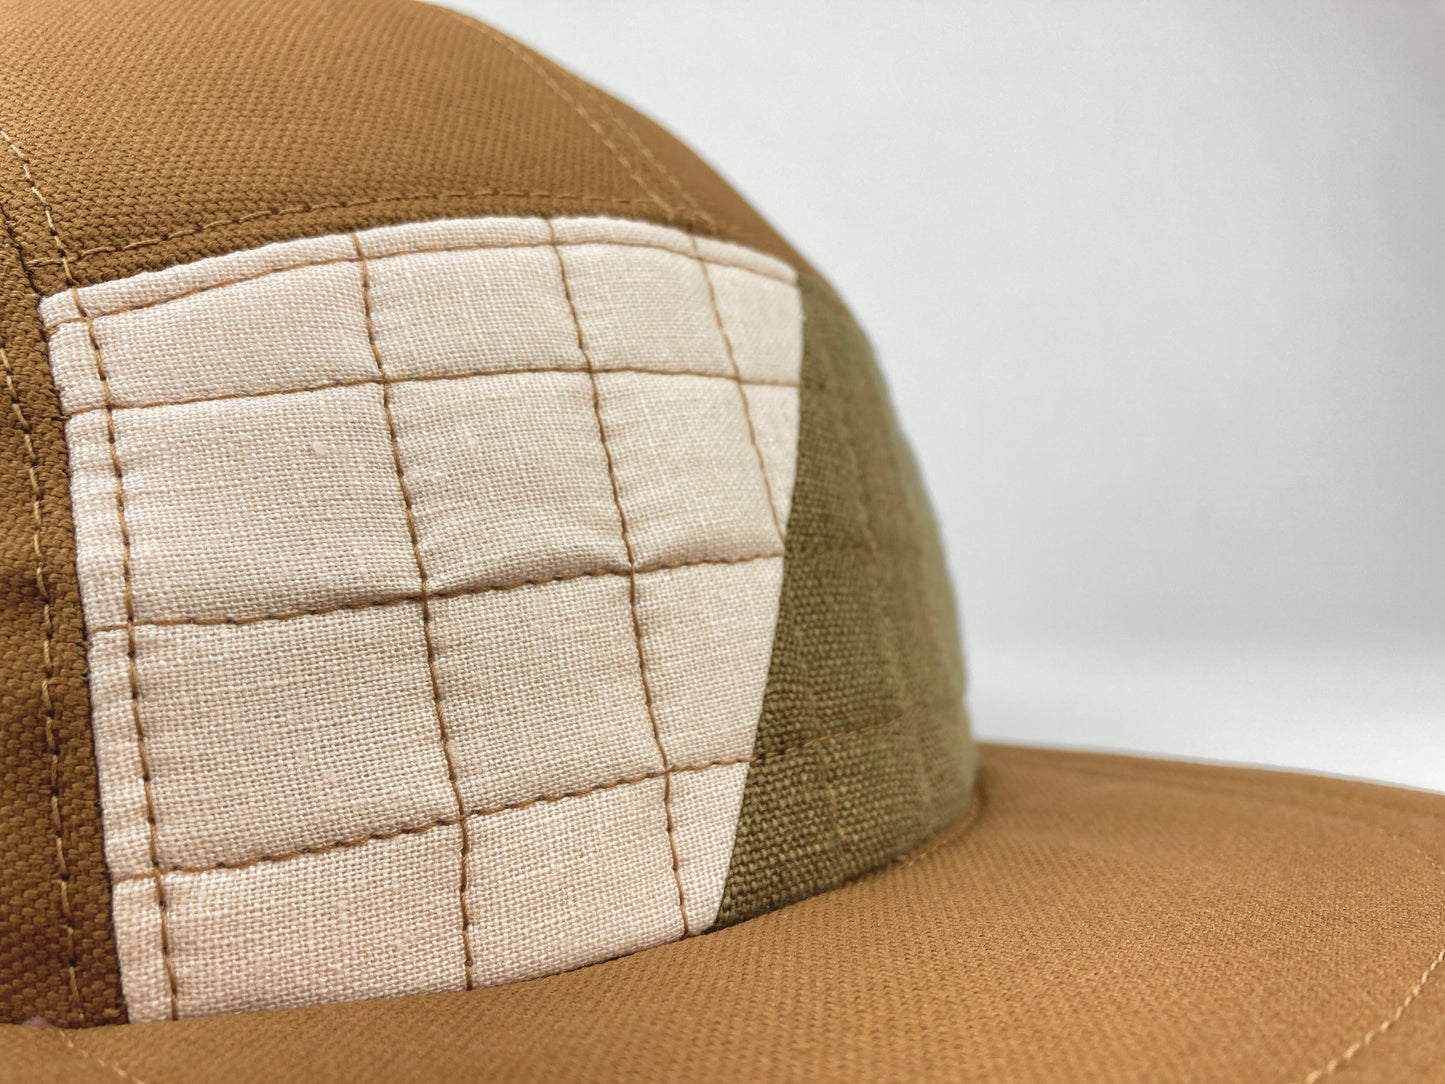 Quilted Camp Hat - Fifty Fifty Olive Blush